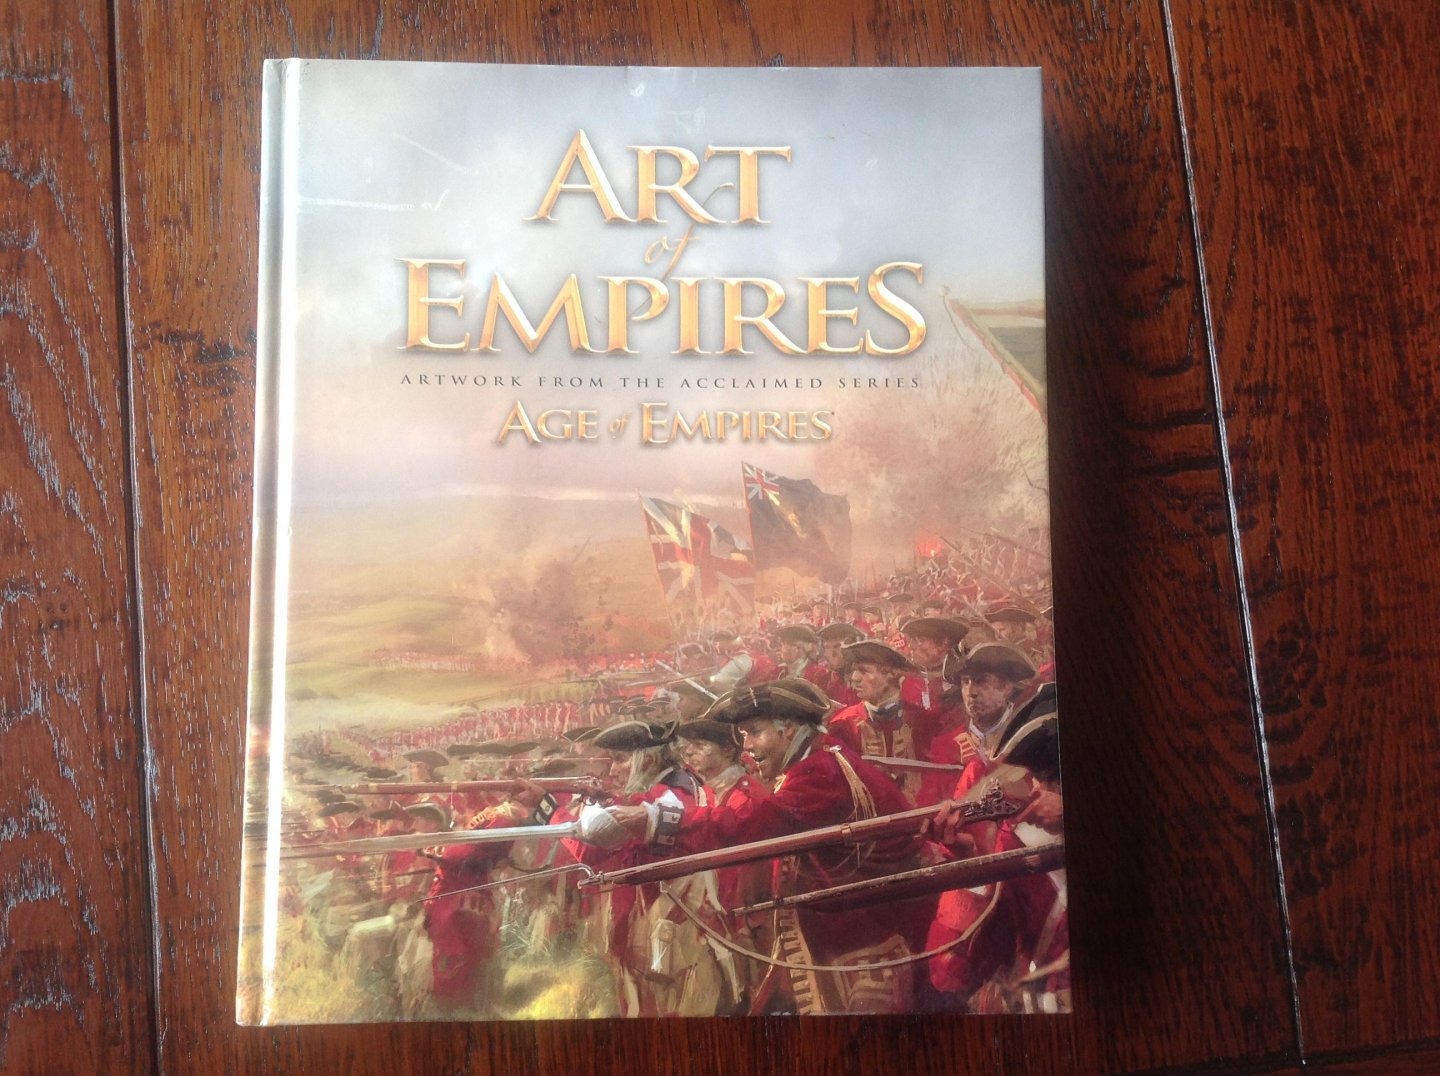  - Art of empires artwork from the acclaimed series Age of empires